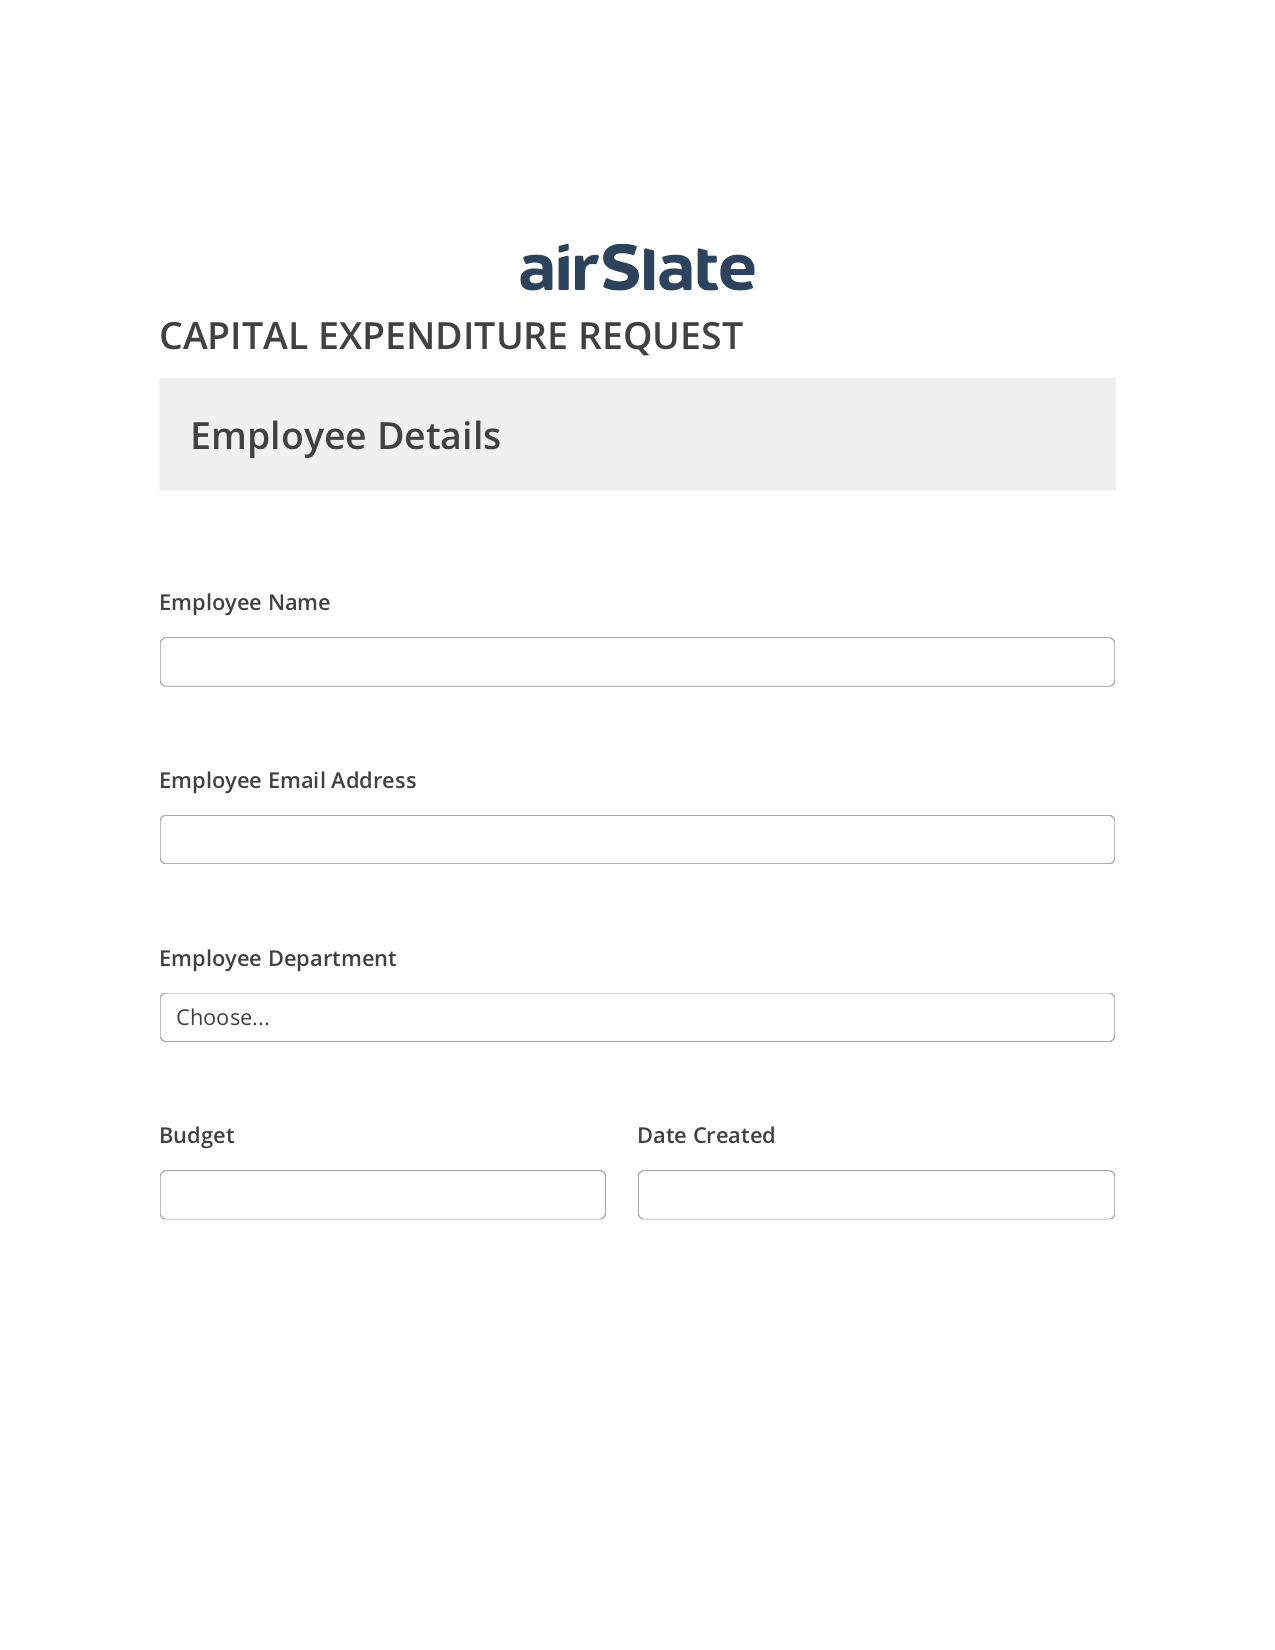 Capital Expenditure Request Approval Workflow Pre-fill Slate from MS Dynamics 365 record, Create Slate Reminder Bot, Export to Smartsheet